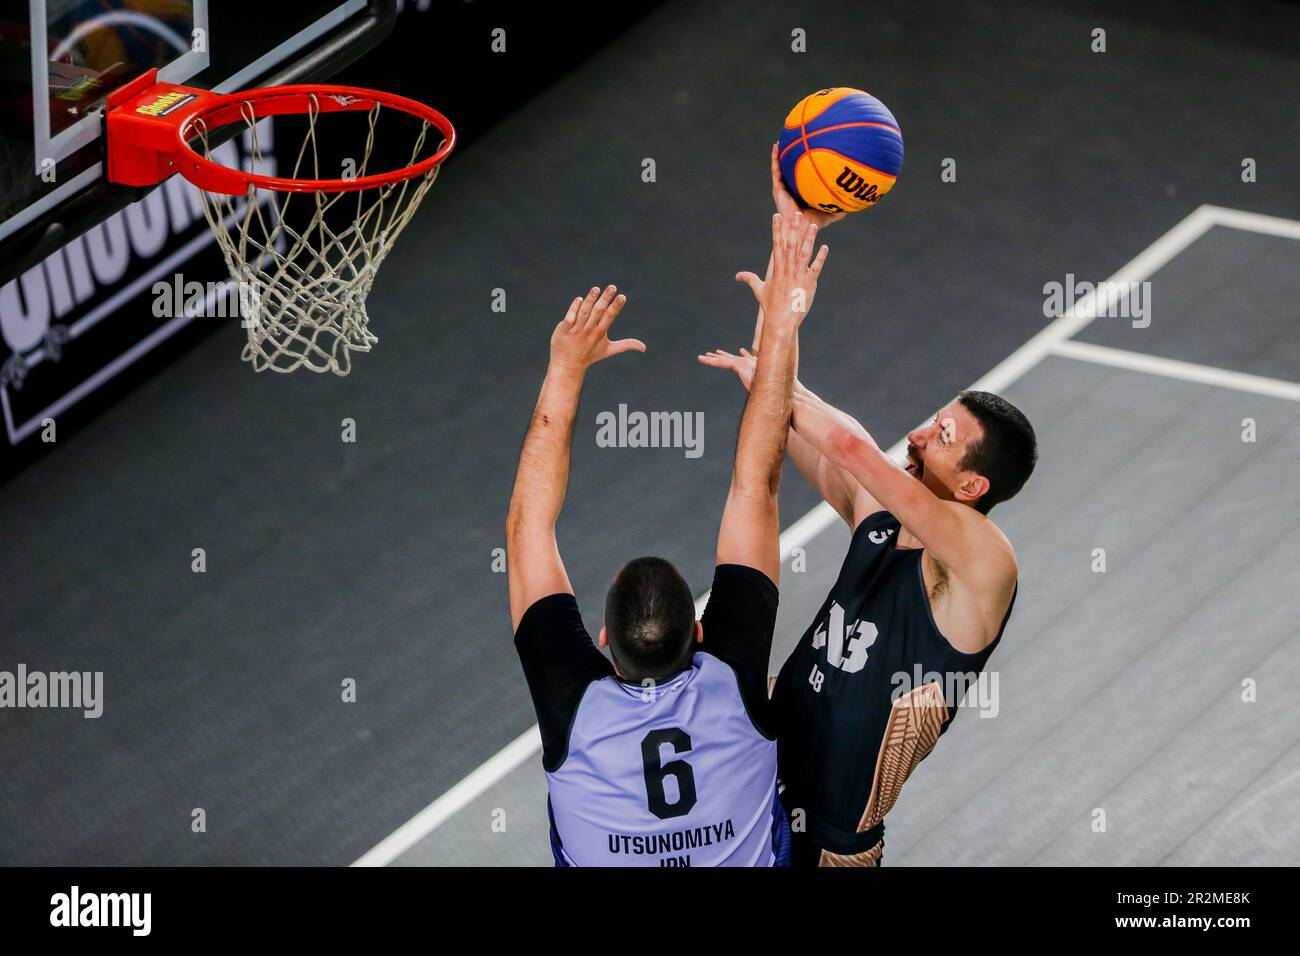 Makati City. 20th May, 2023. Strahinja Stojacic (R) of Ub Huishan NE competes against Teodor Atanasov of Utsunomiya Brex Exe during the pool A match between Ub Huishan NE from Serbia and Utsunomiya Brex Exe from Japan in the FIBA 3x3 World Tour Manila Masters 2023 in Makati City, the Philippines on May 20, 2023. Credit: Rouelle Umali/Xinhua/Alamy Live News Stock Photo